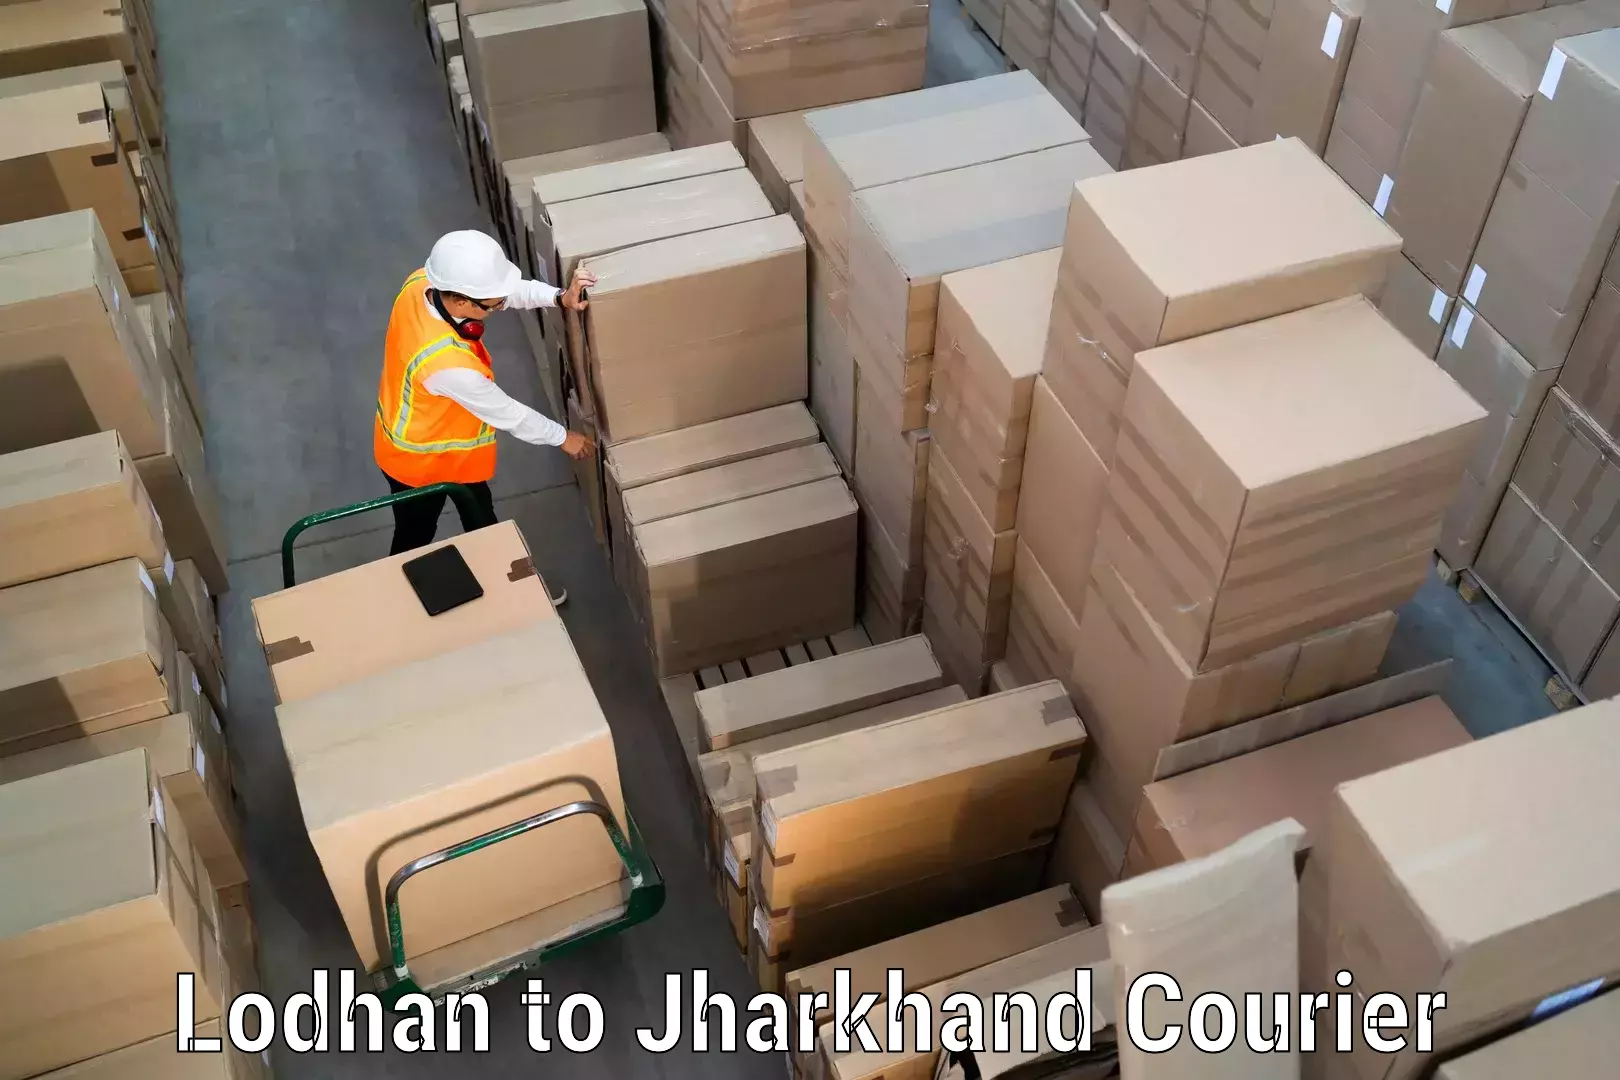 Reliable parcel services Lodhan to Godabar Chatra